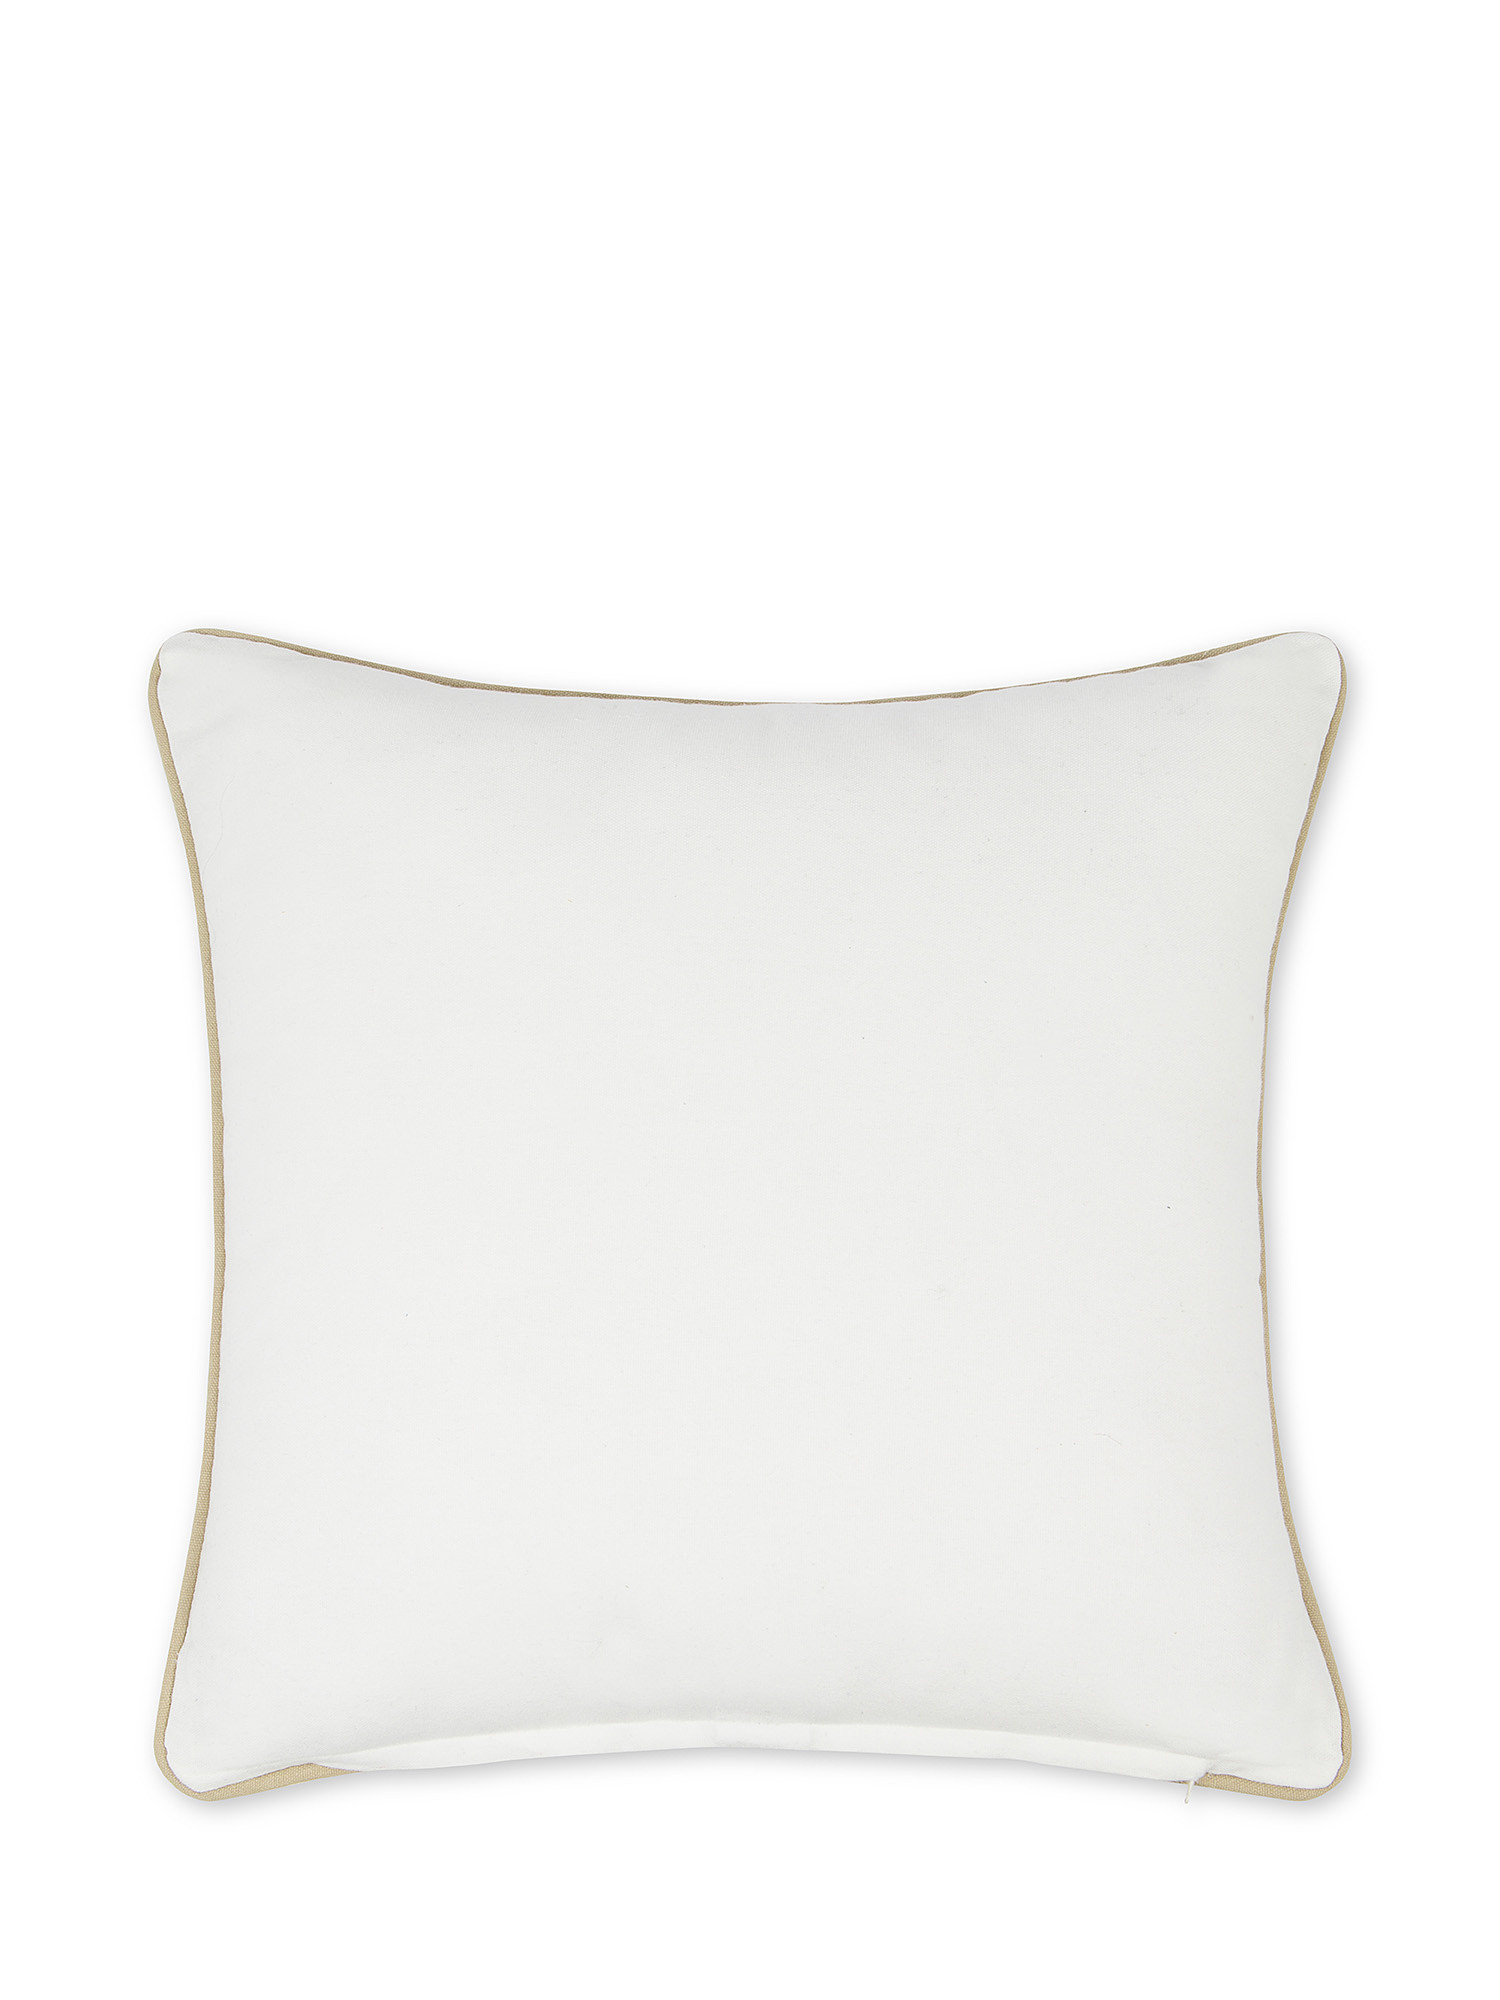 Cushion 45x45 cm with embroidery, Beige, large image number 1